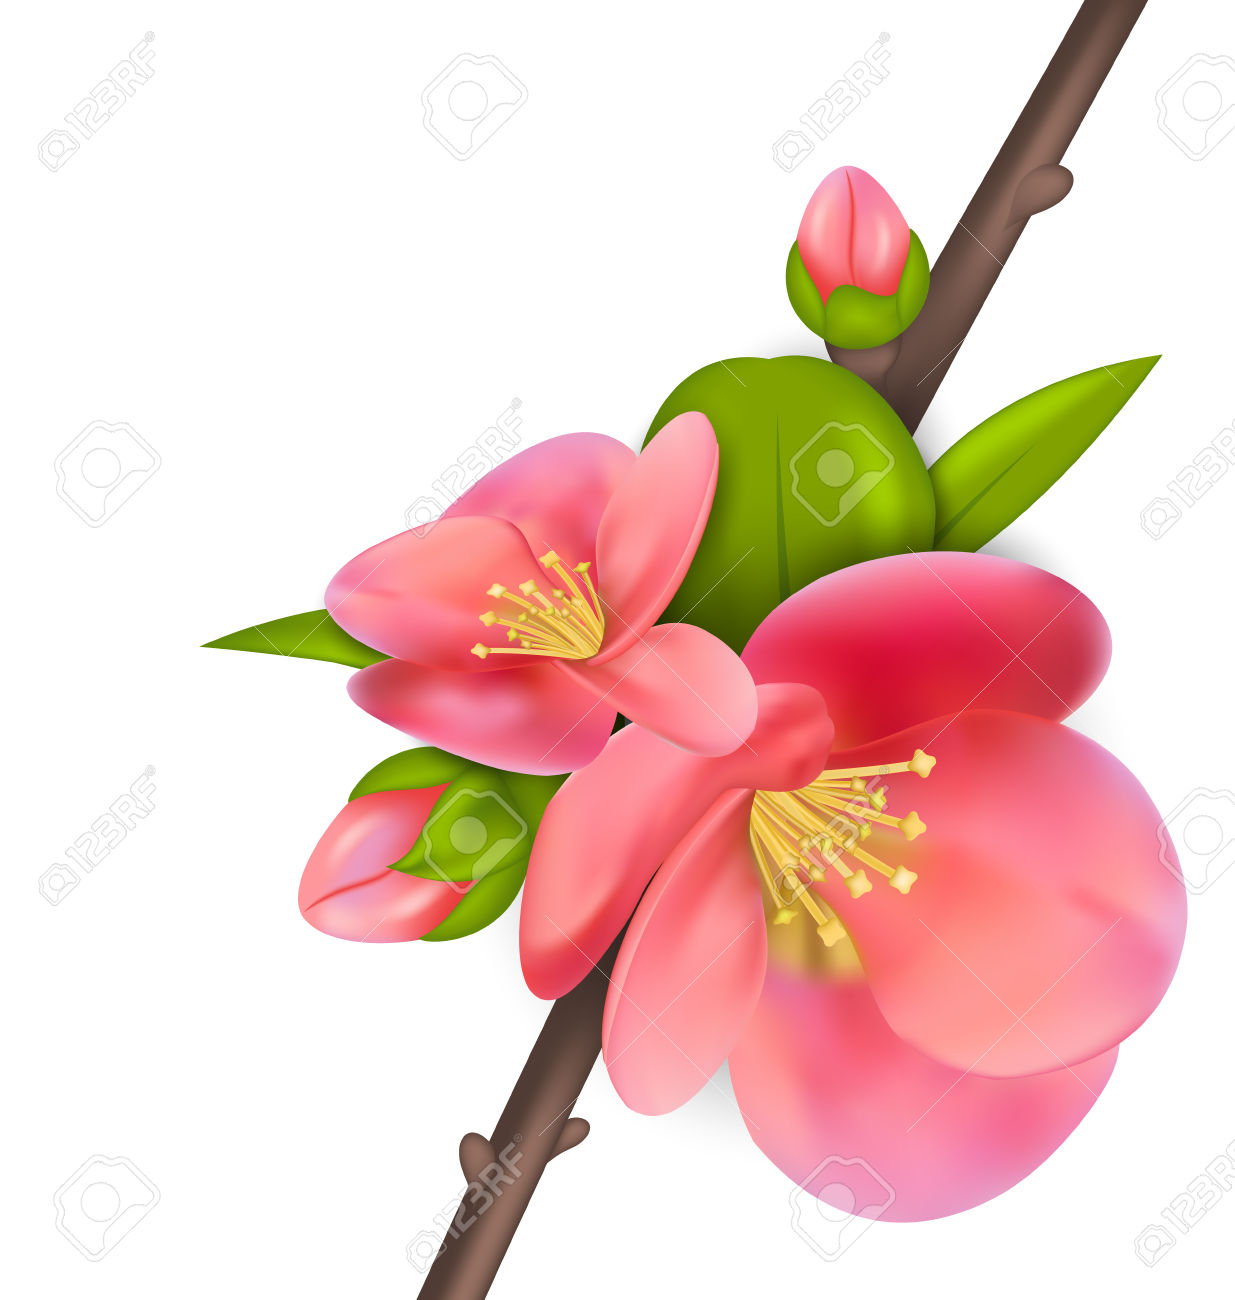 Japanese Quince clipart #15, Download drawings